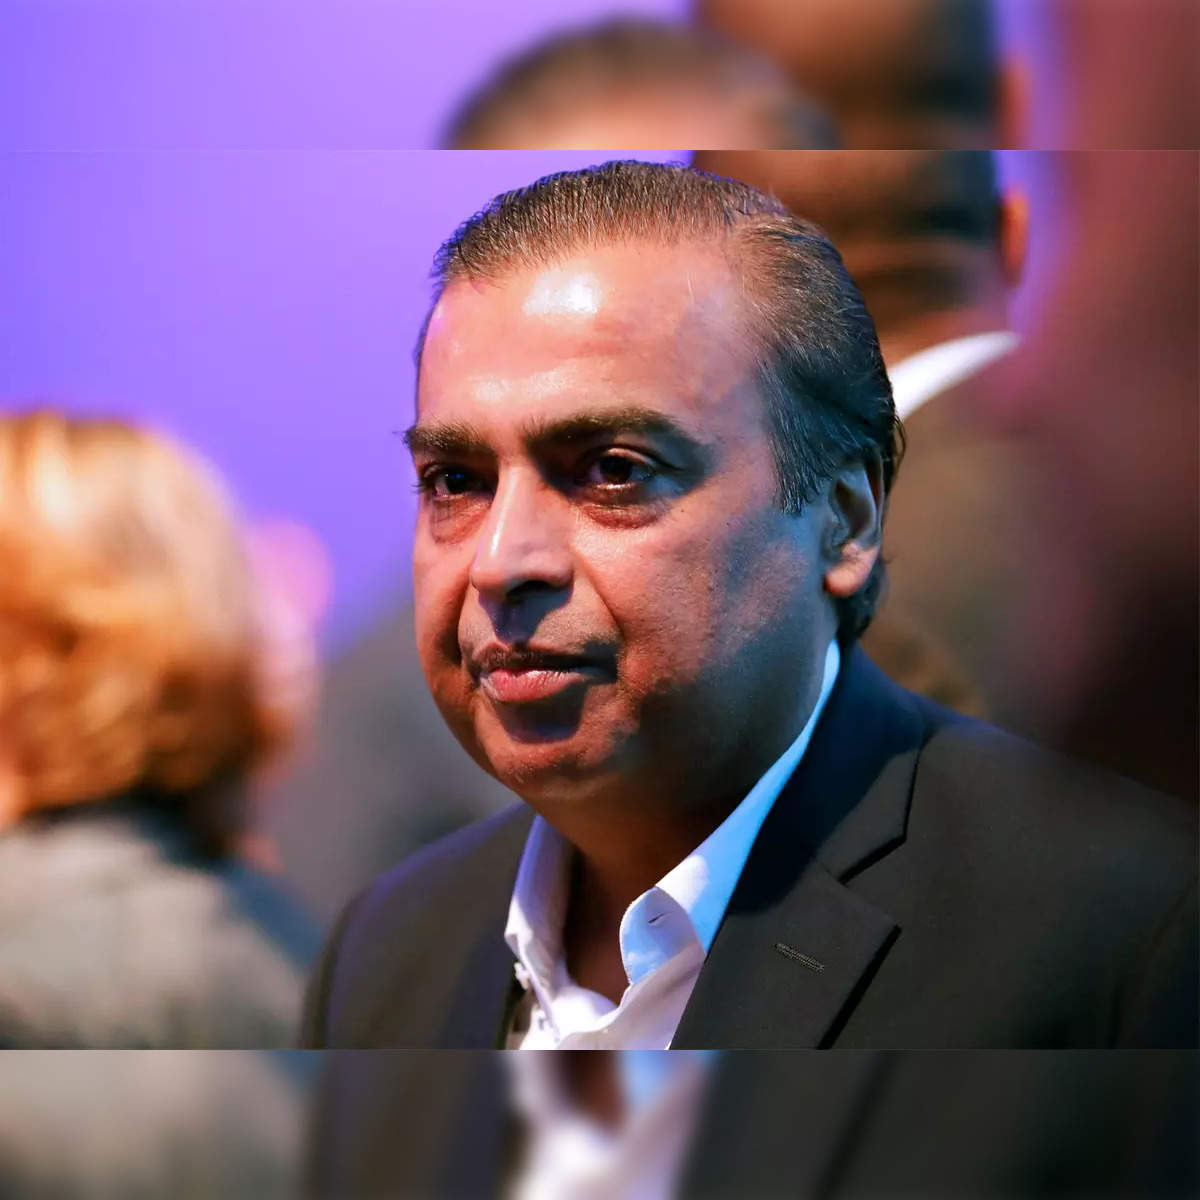 The chief chief executive officer of Arc - undefined - Mukesh Ambani